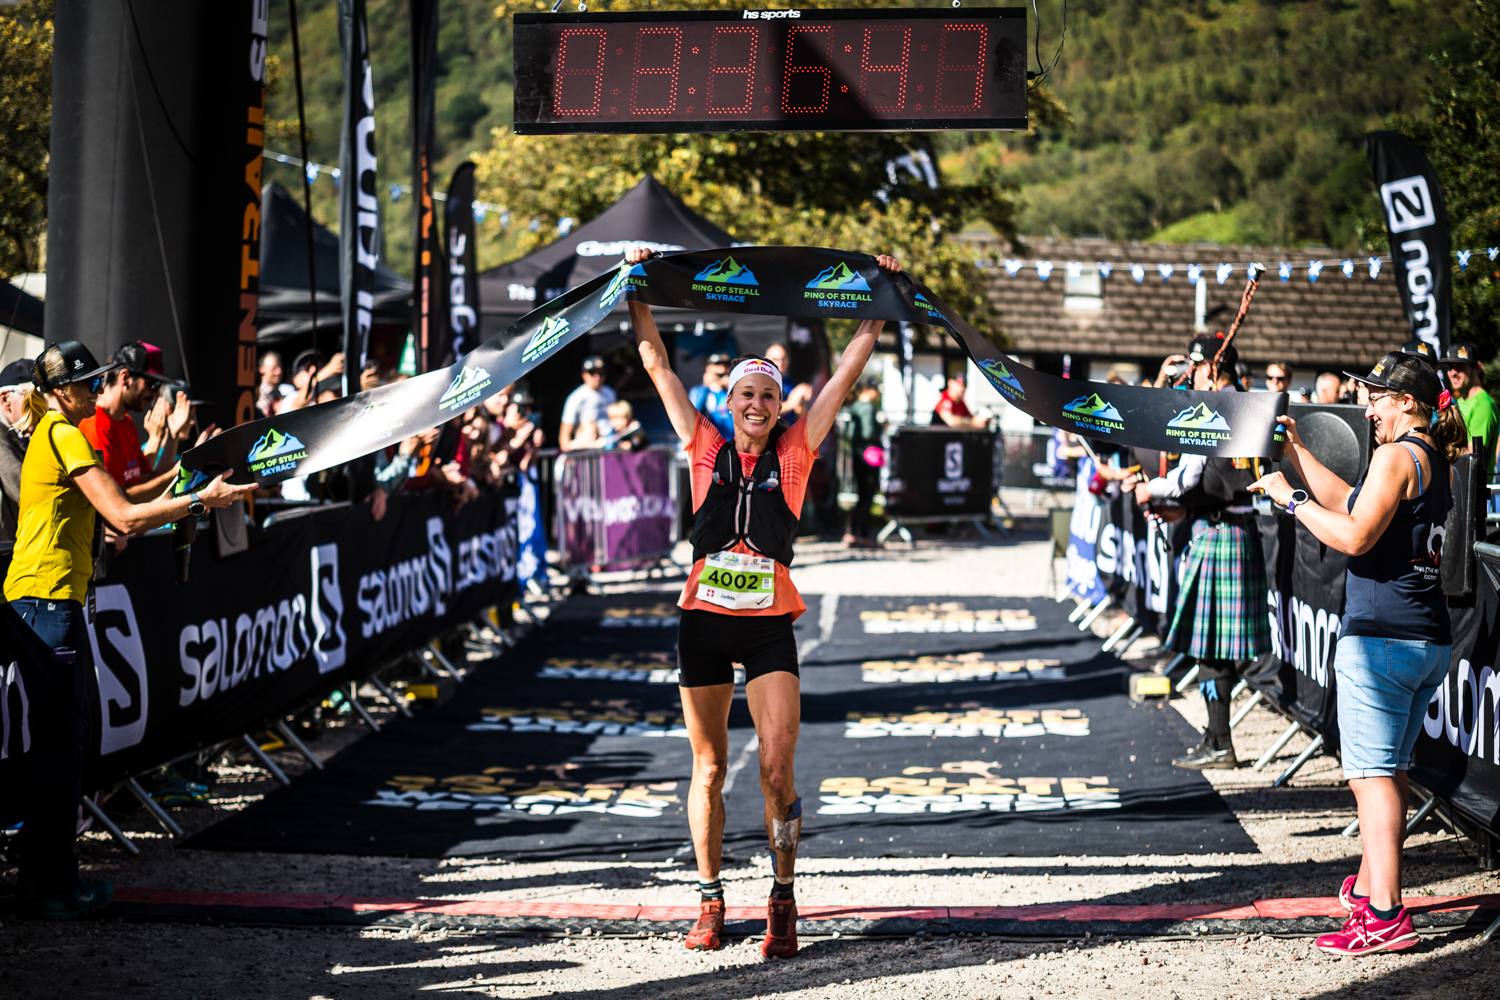 Salomon Ring of Steall - First Female - Judith Wyder - Finish Line 1 - Copyright No Limits Photography